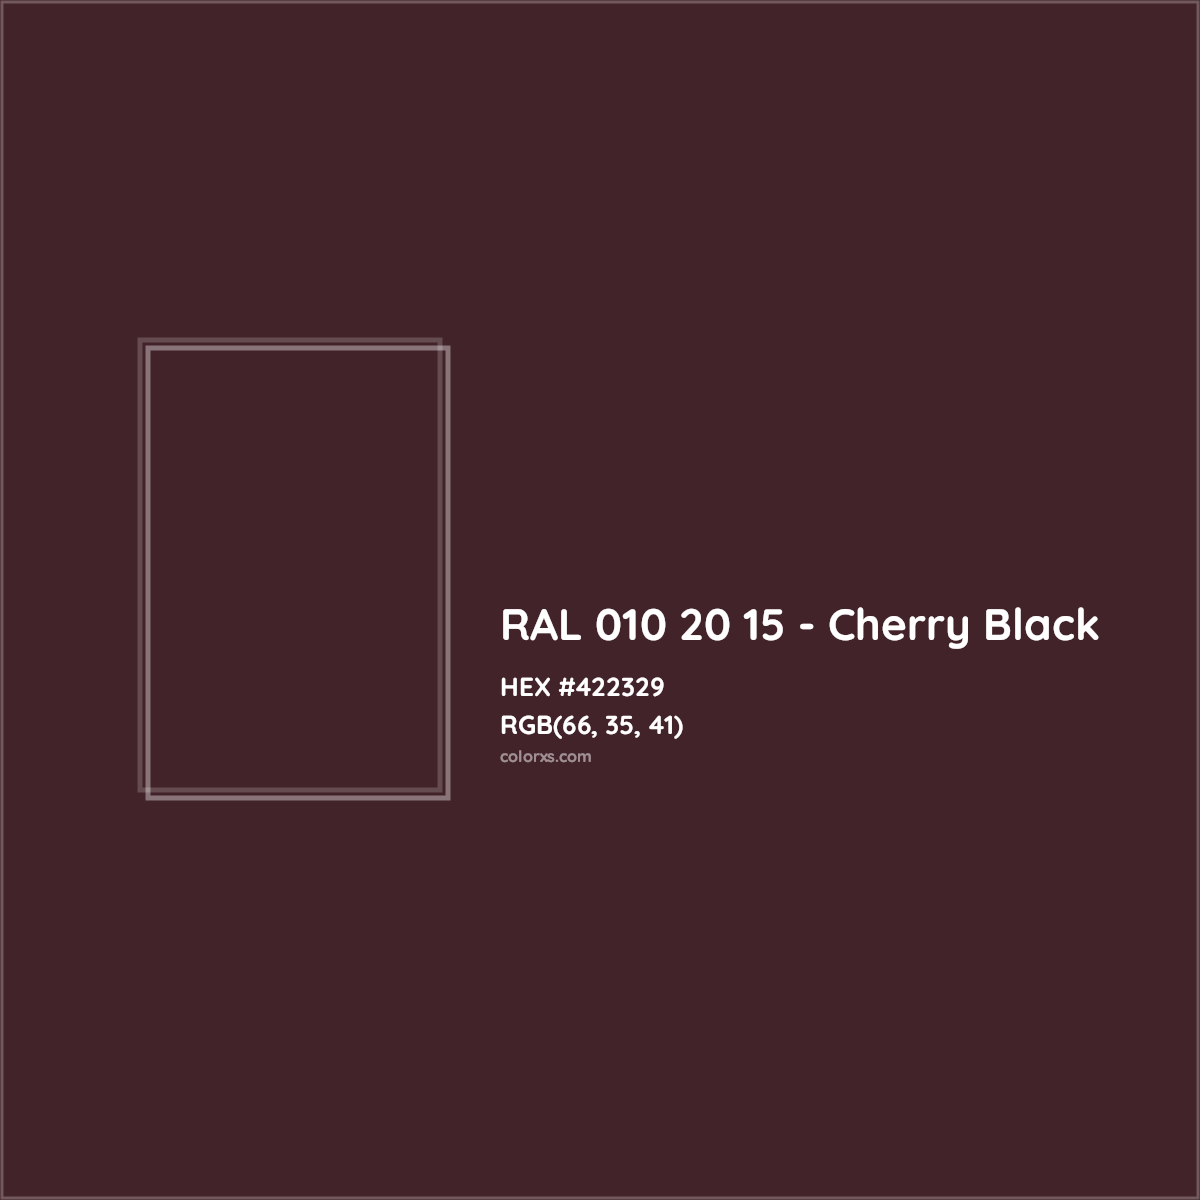 HEX #422329 RAL 010 20 15 - Cherry Black CMS RAL Design - Color Code